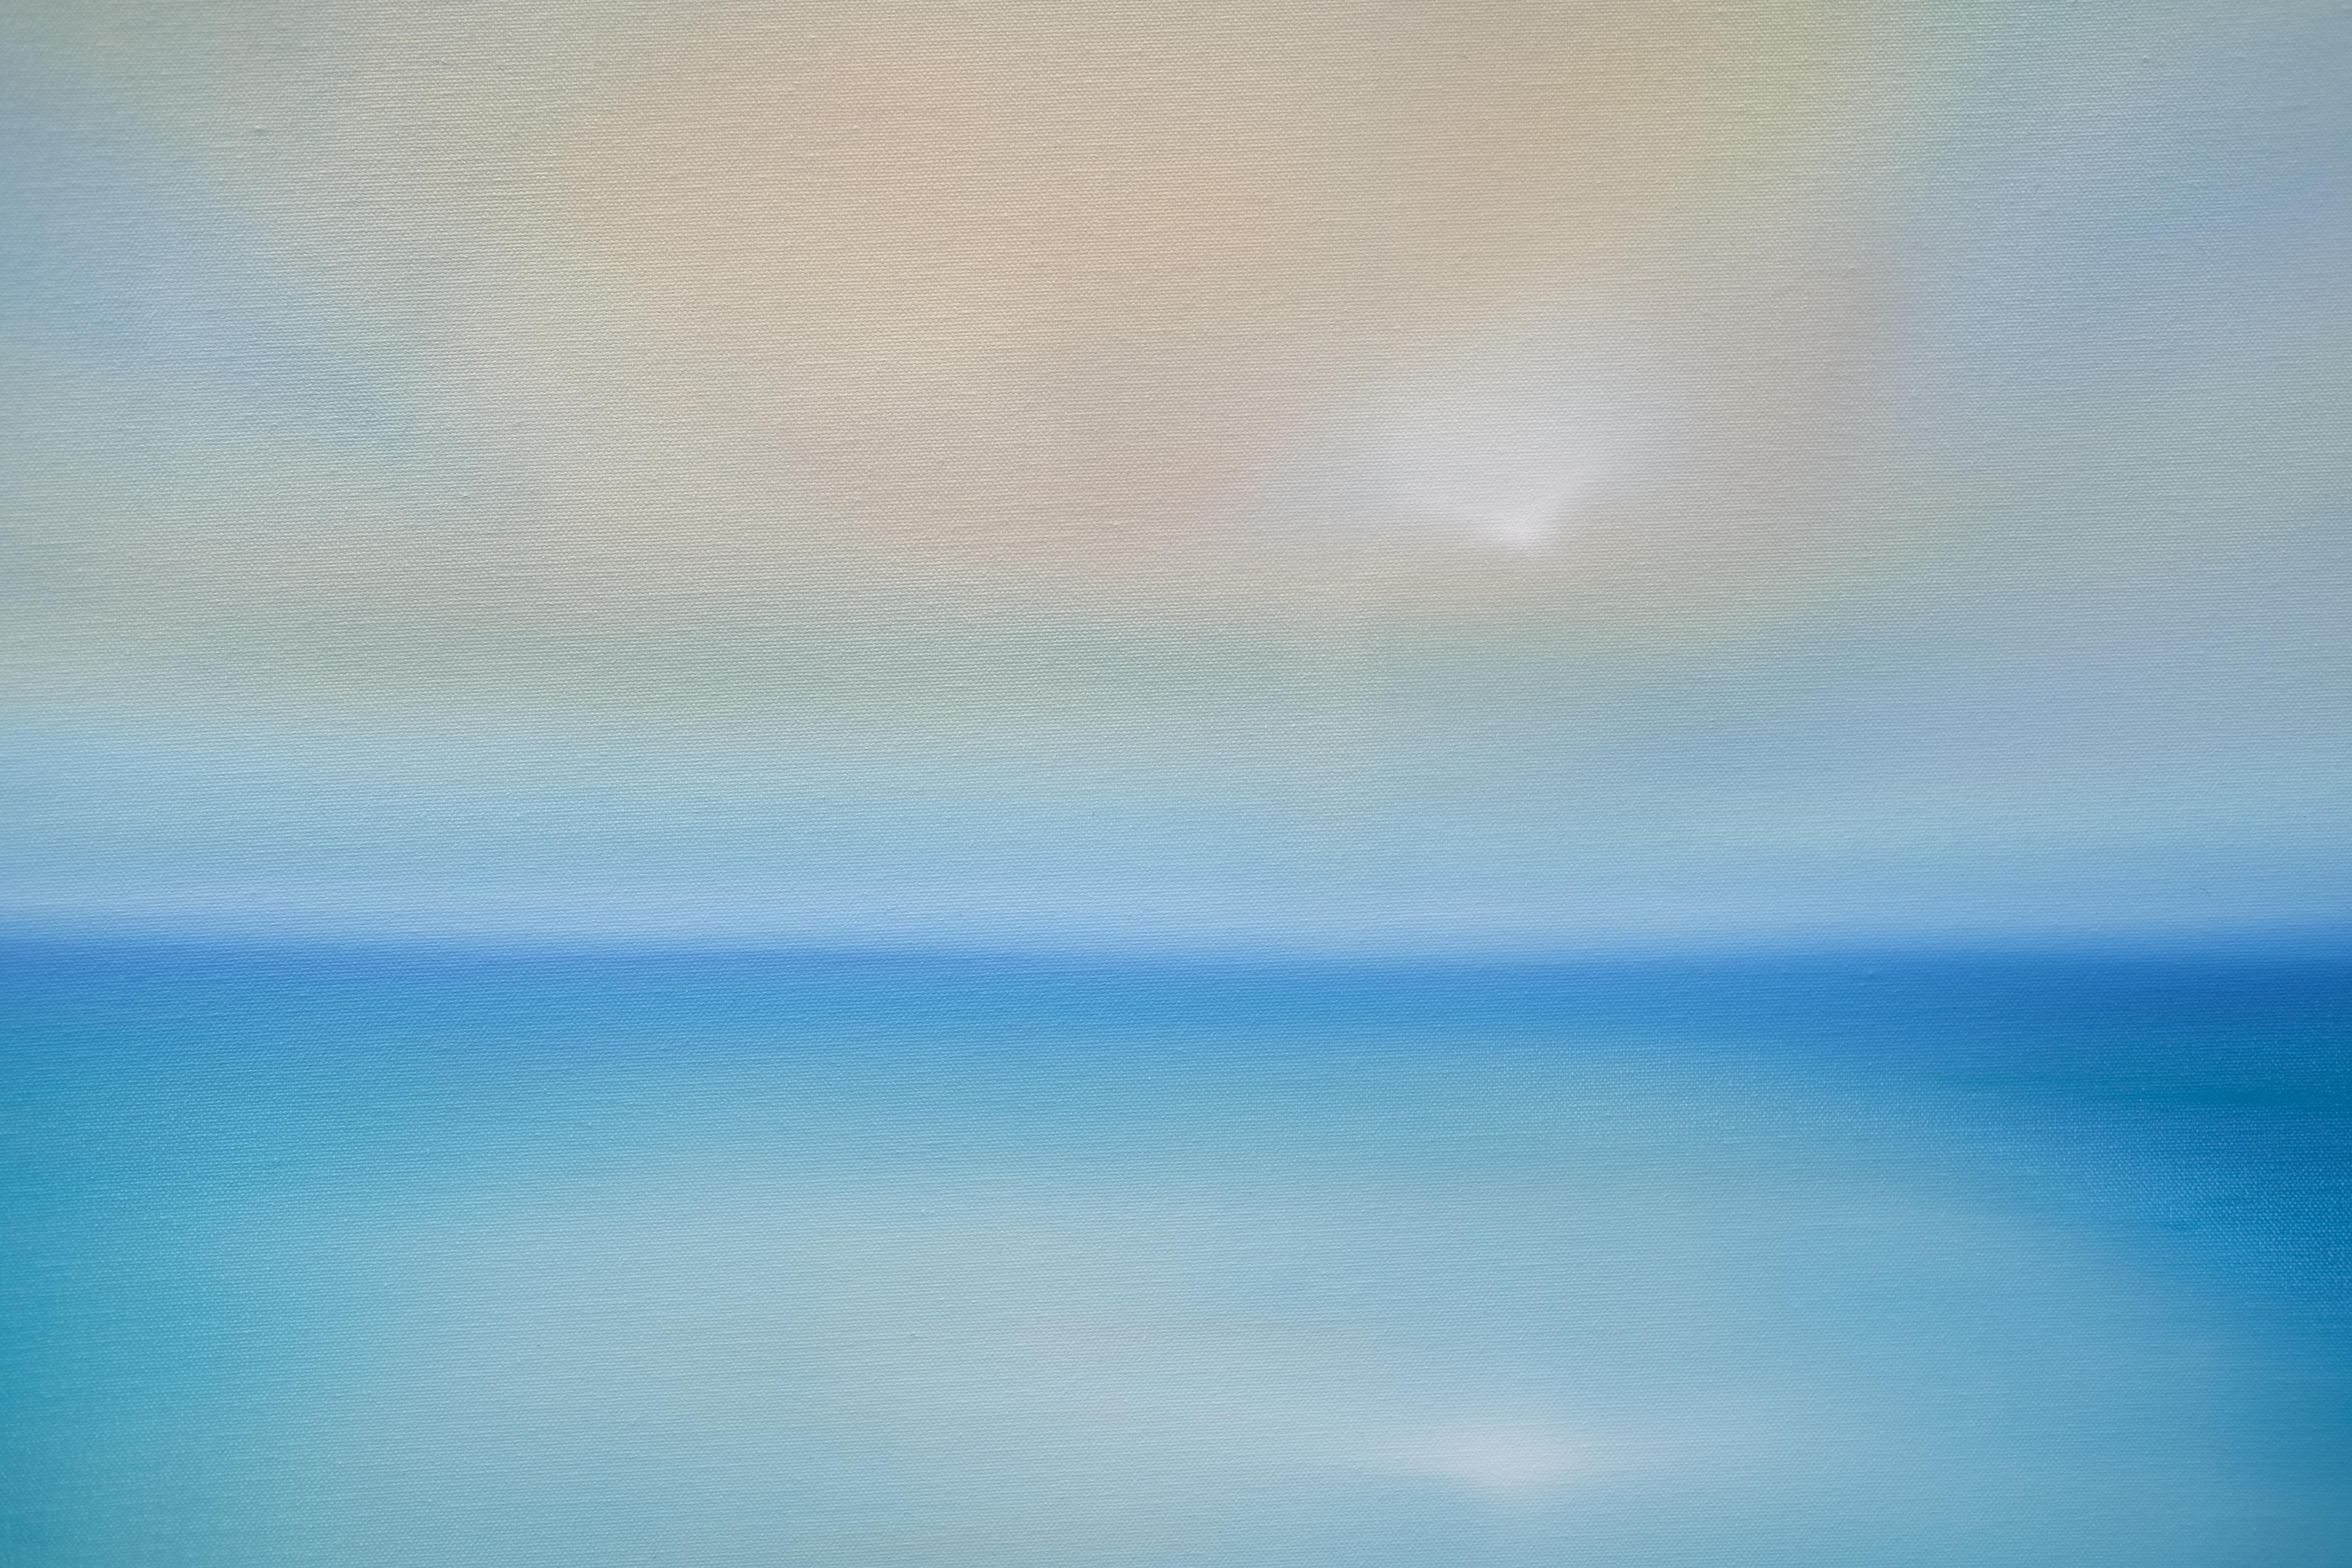 Calm Seas-original abstract seascape-ocean painting for sale-contemporary Art - Painting by Jonathan Speed